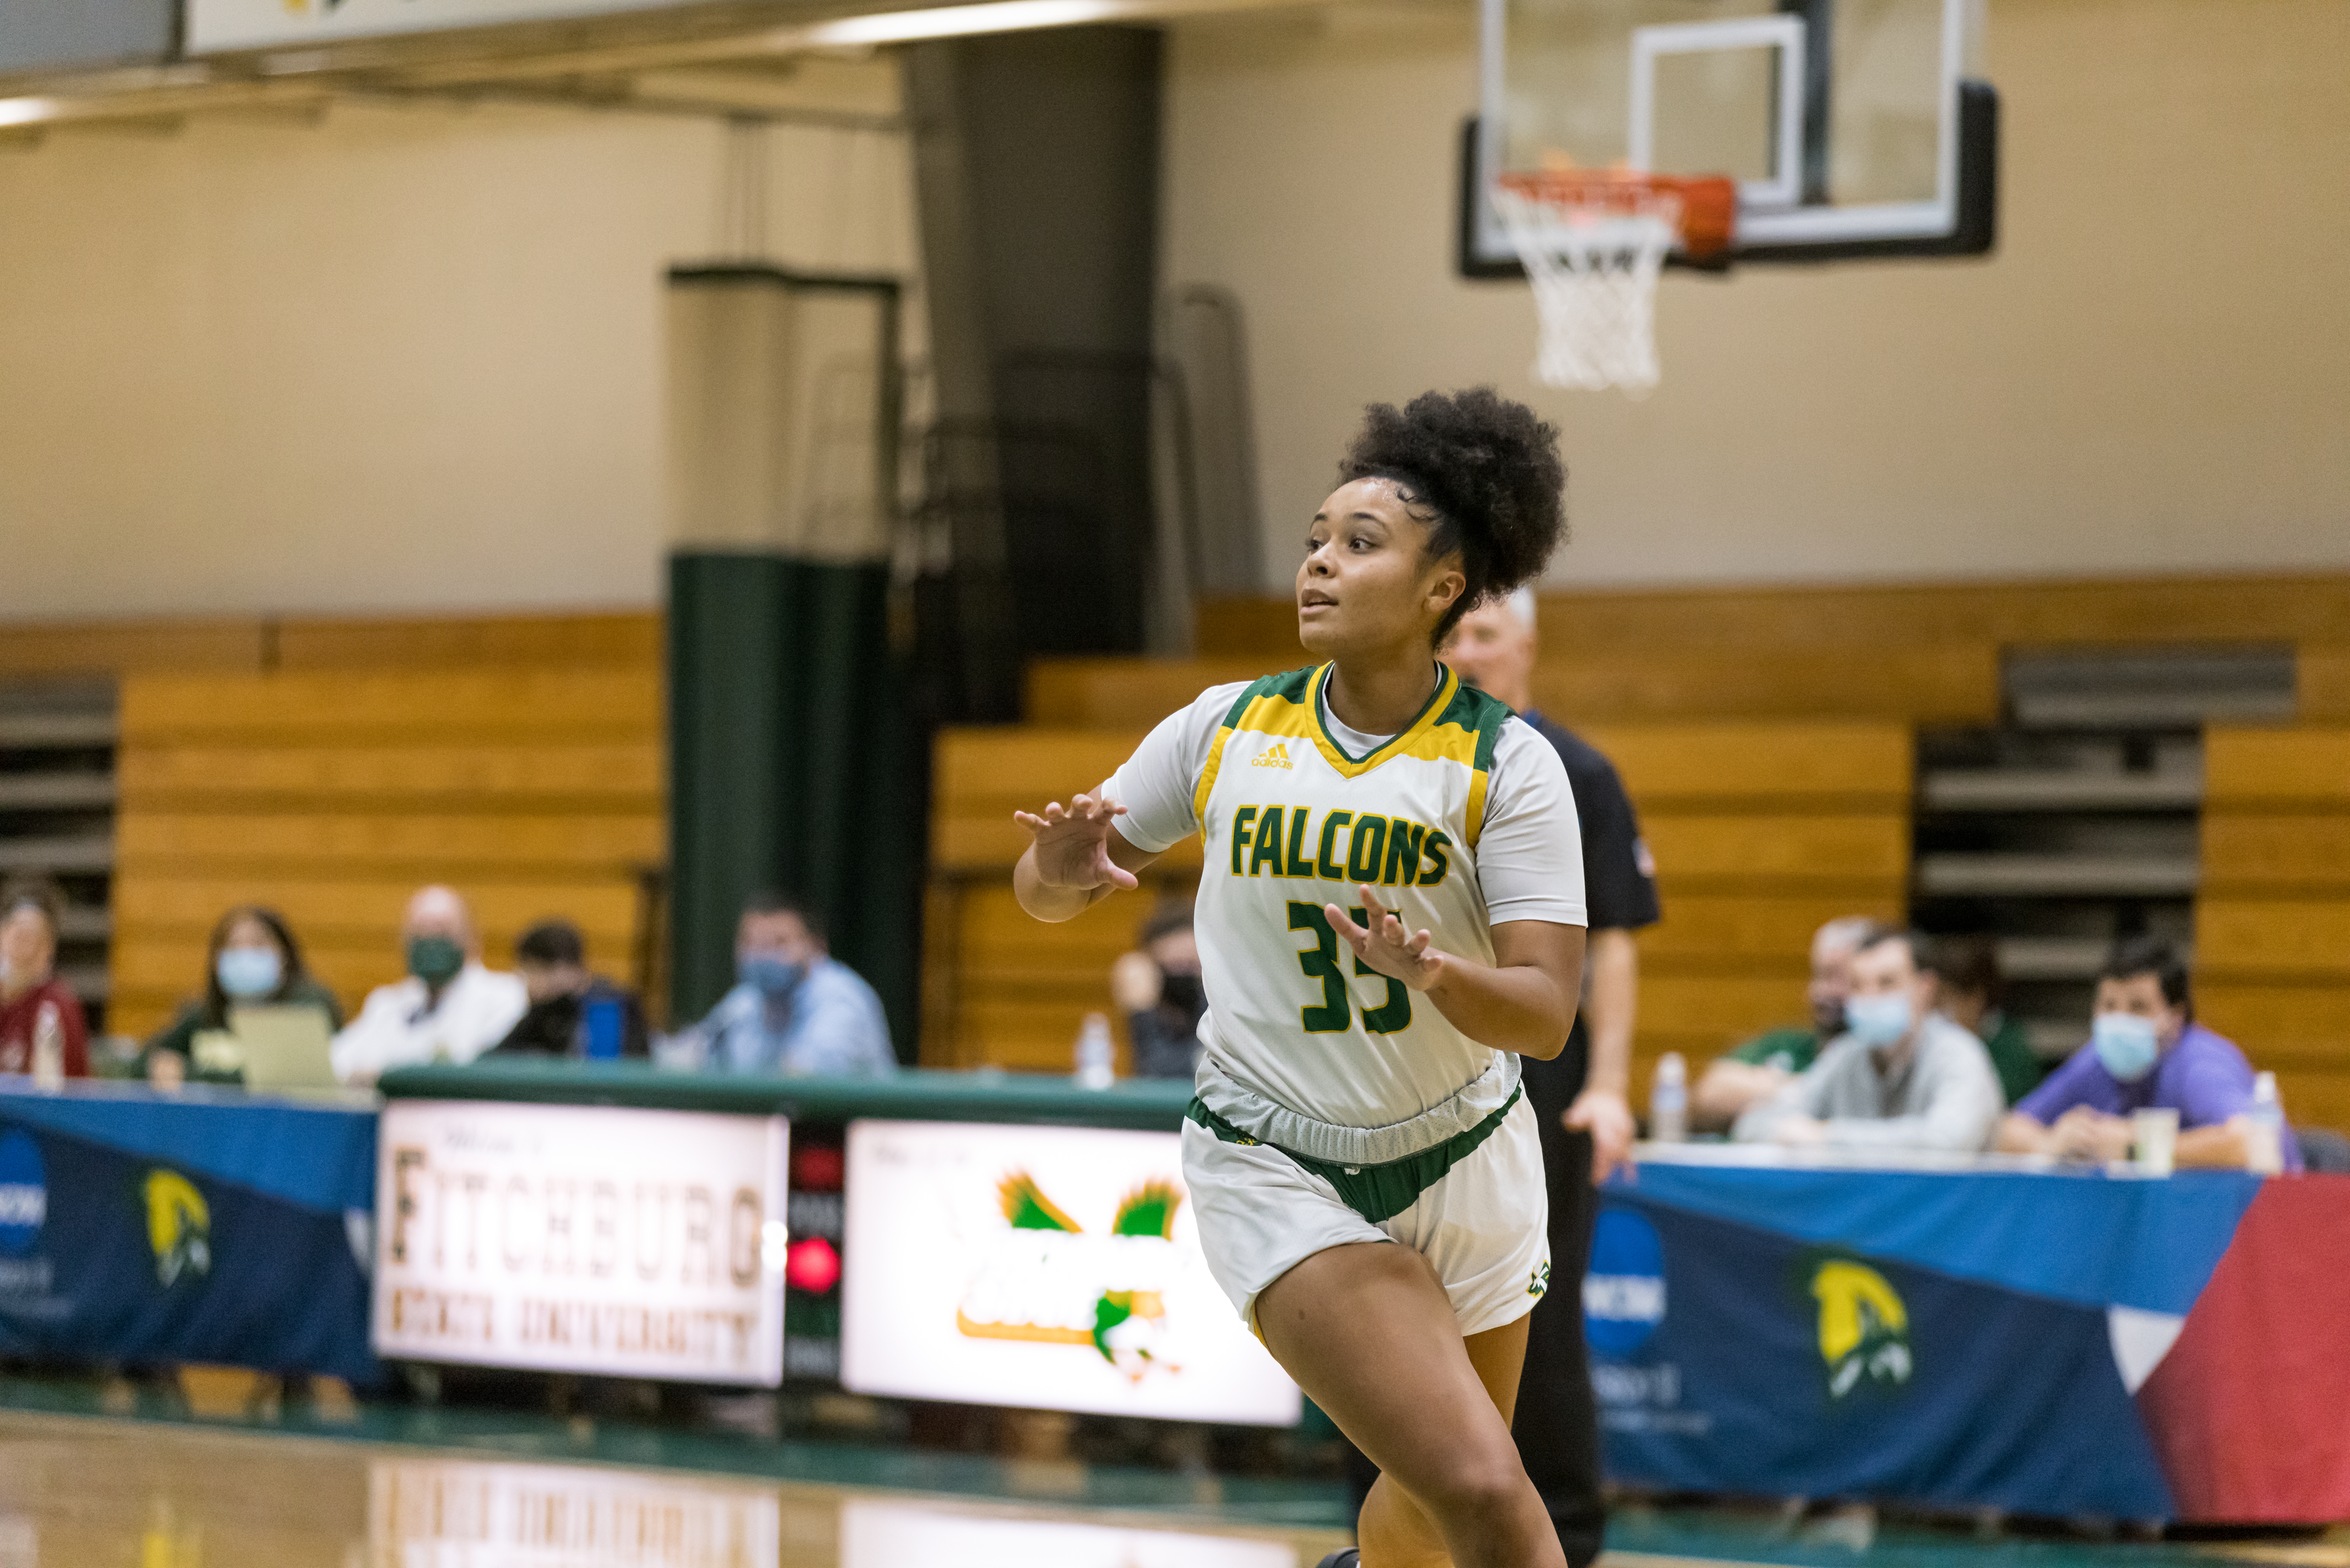 Falcons Outlasted By Western Connecticut State, 62-47